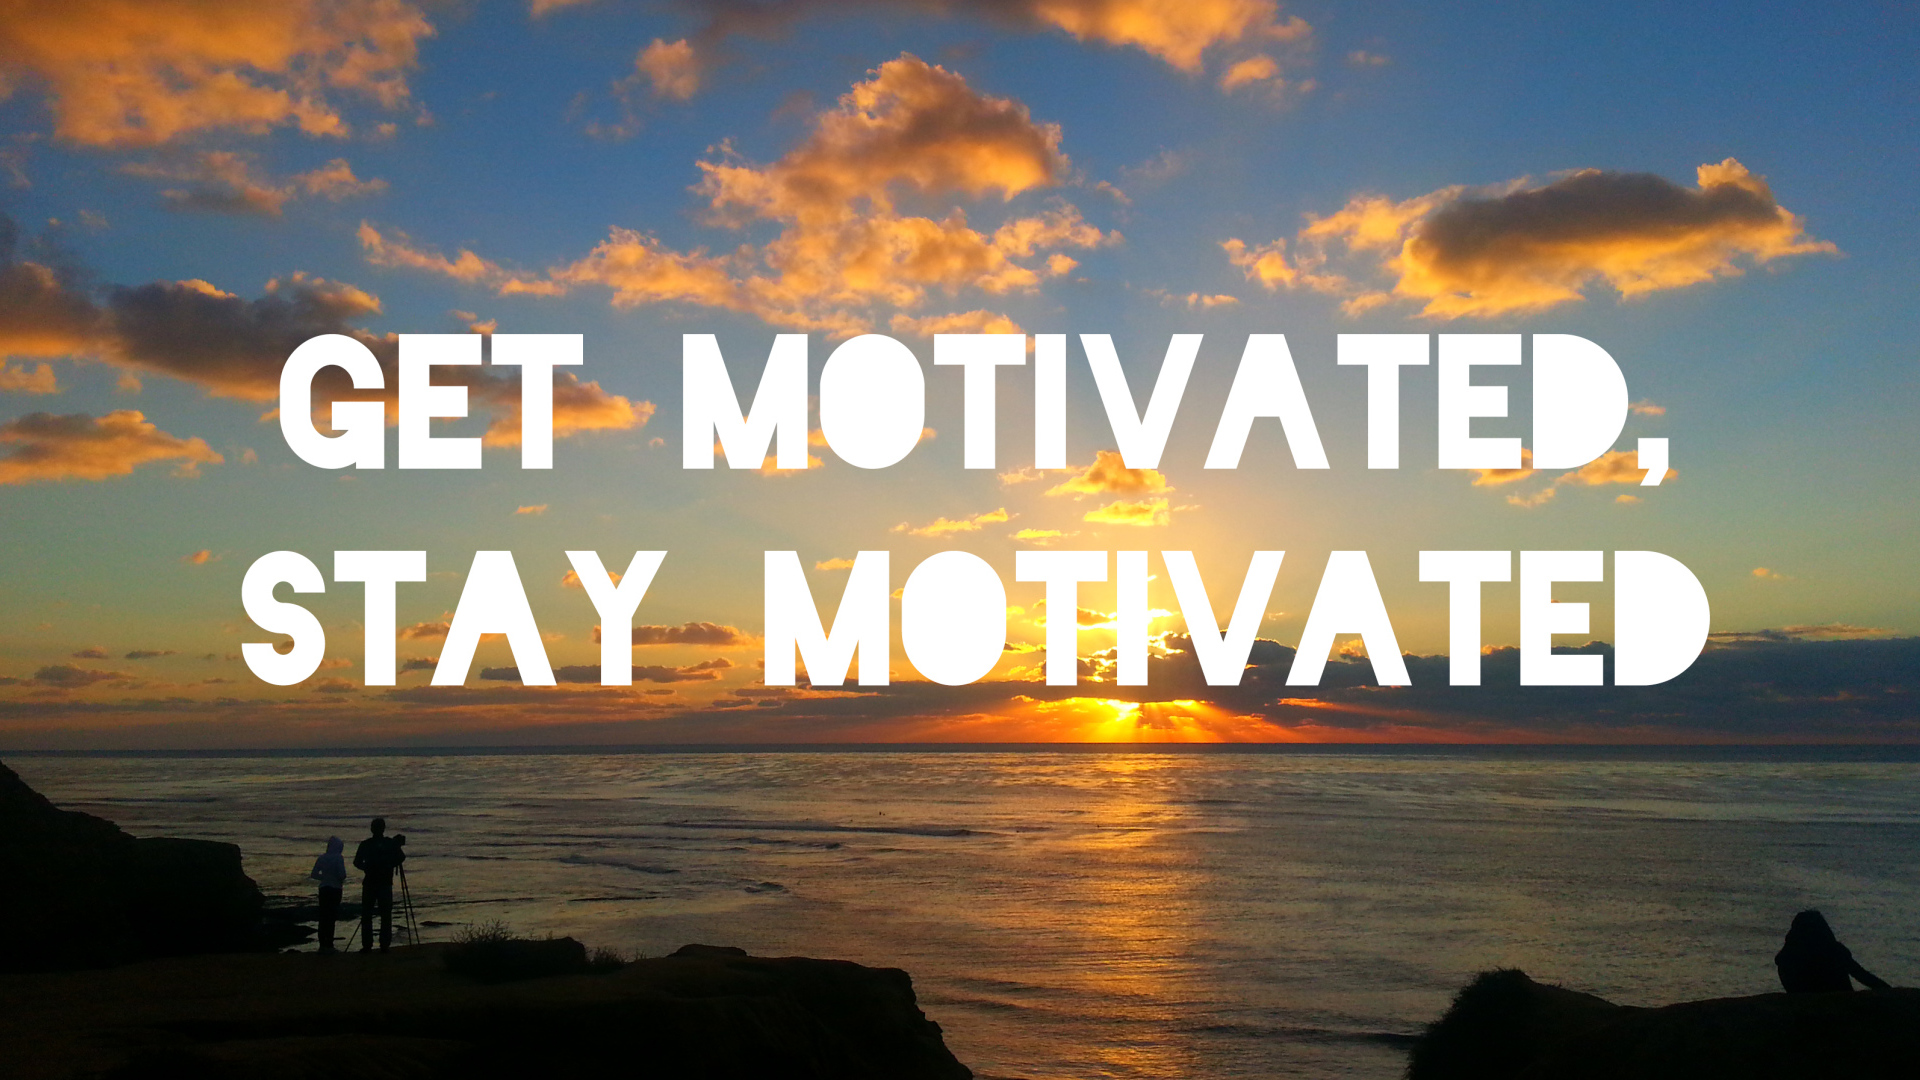 Be motivated and remain so